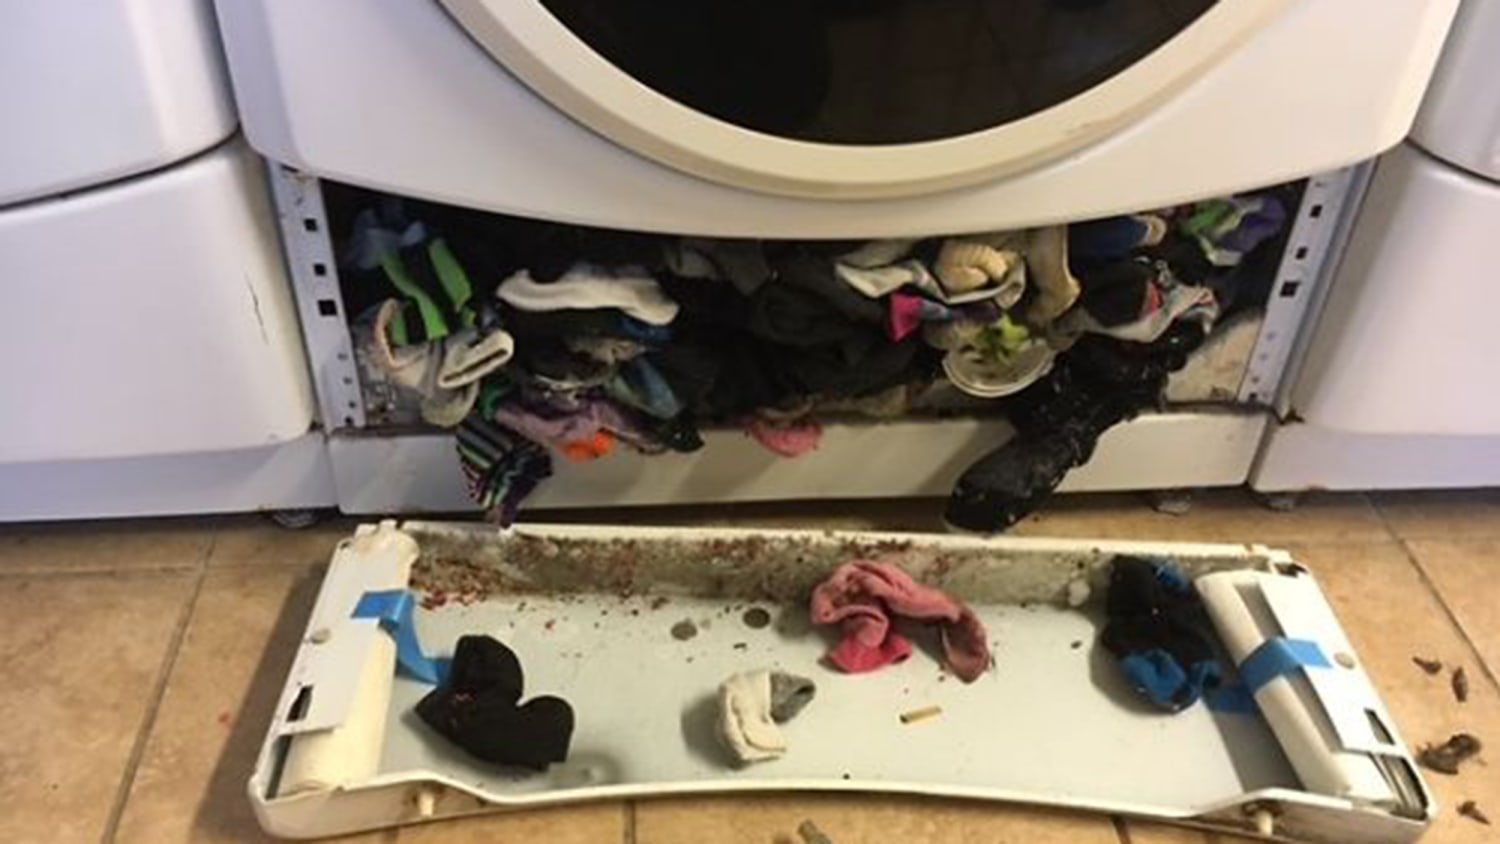 Do washing machines and dryers eat your missing socks?